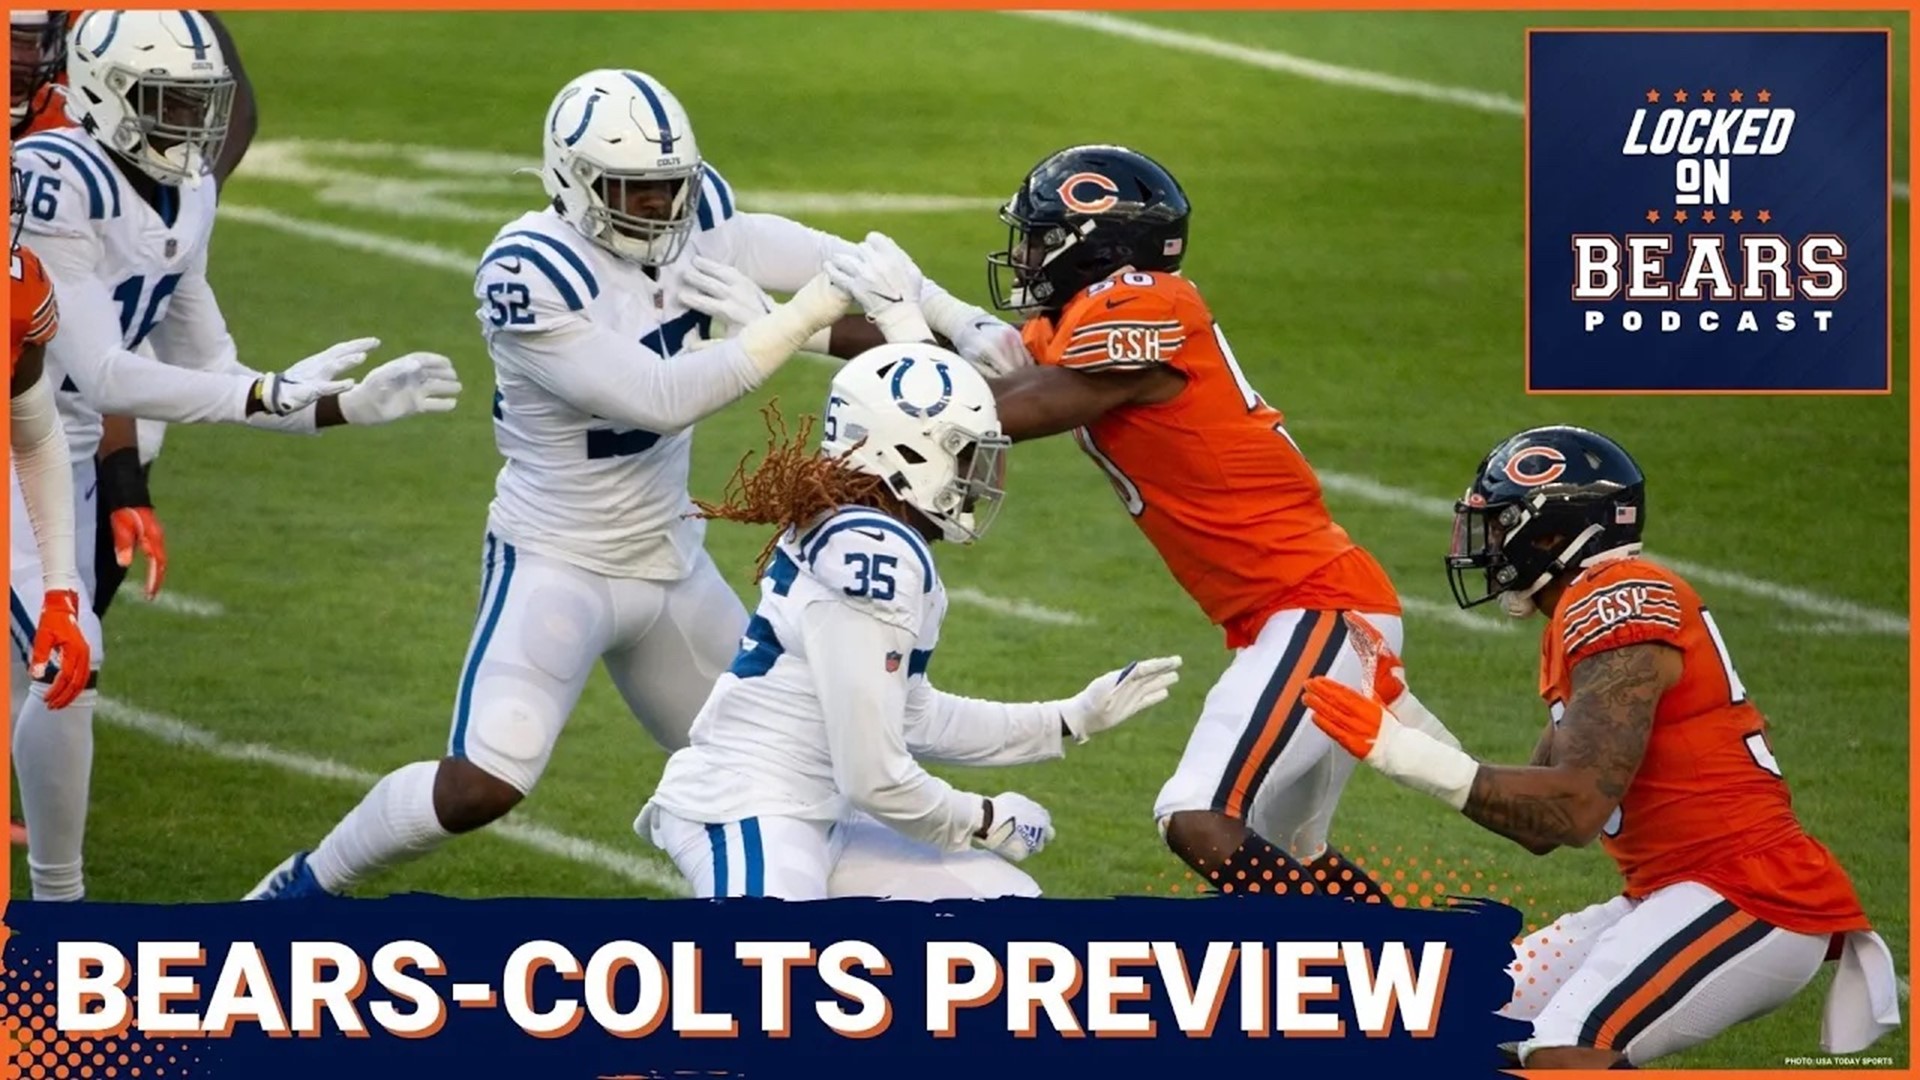 Bears-Colts Preseason Preview: PJ Walker and backups need to step